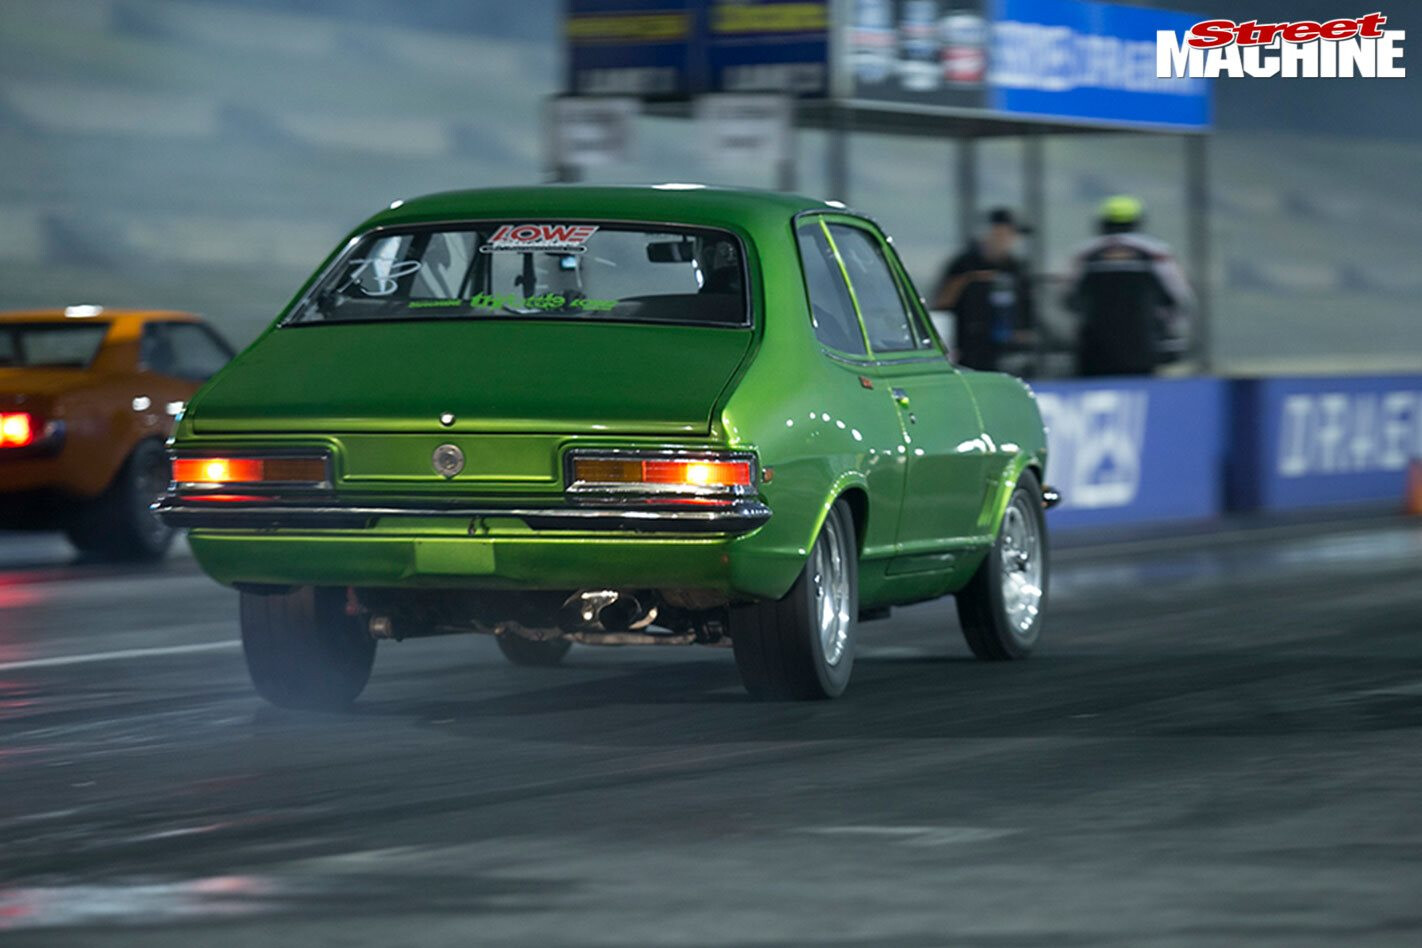 Broads’s LC Torana hits the track – Carnage episode 33